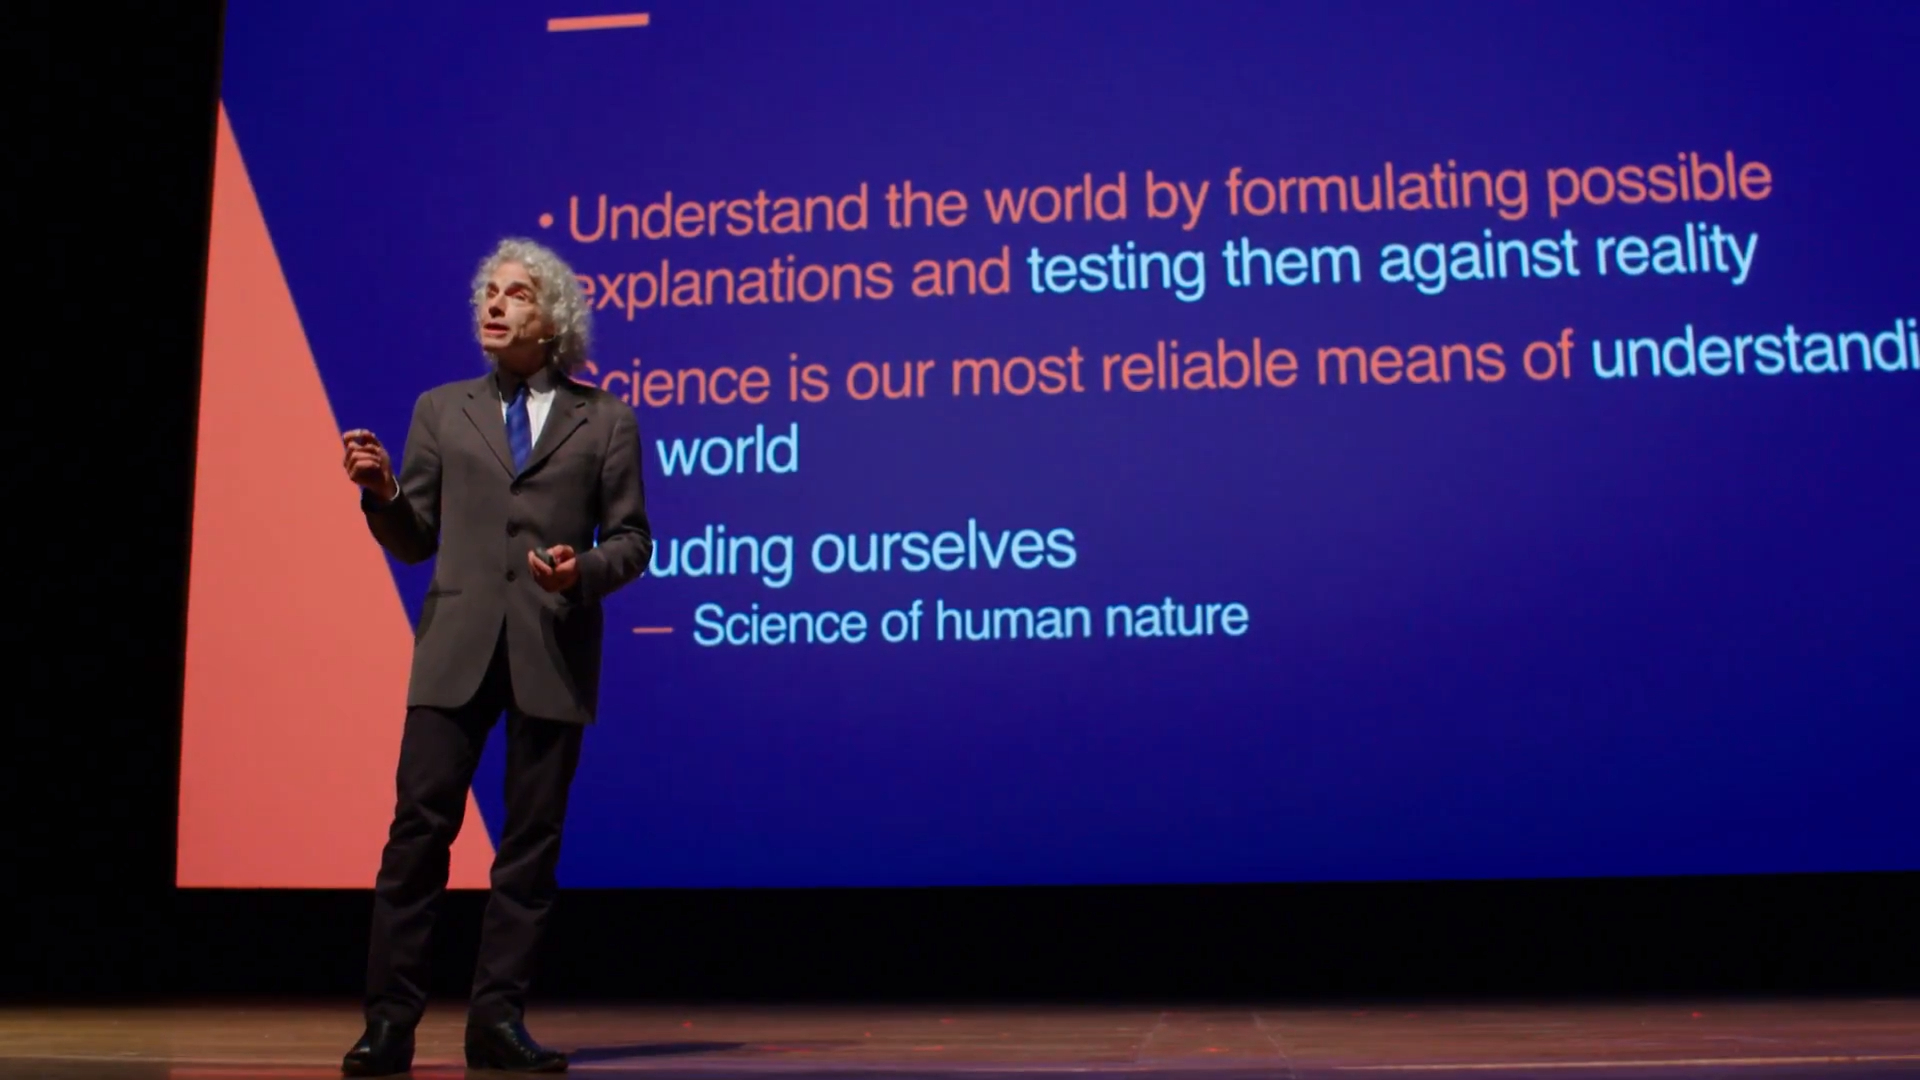 The Case for Reason, Science, Humanism, and Progress